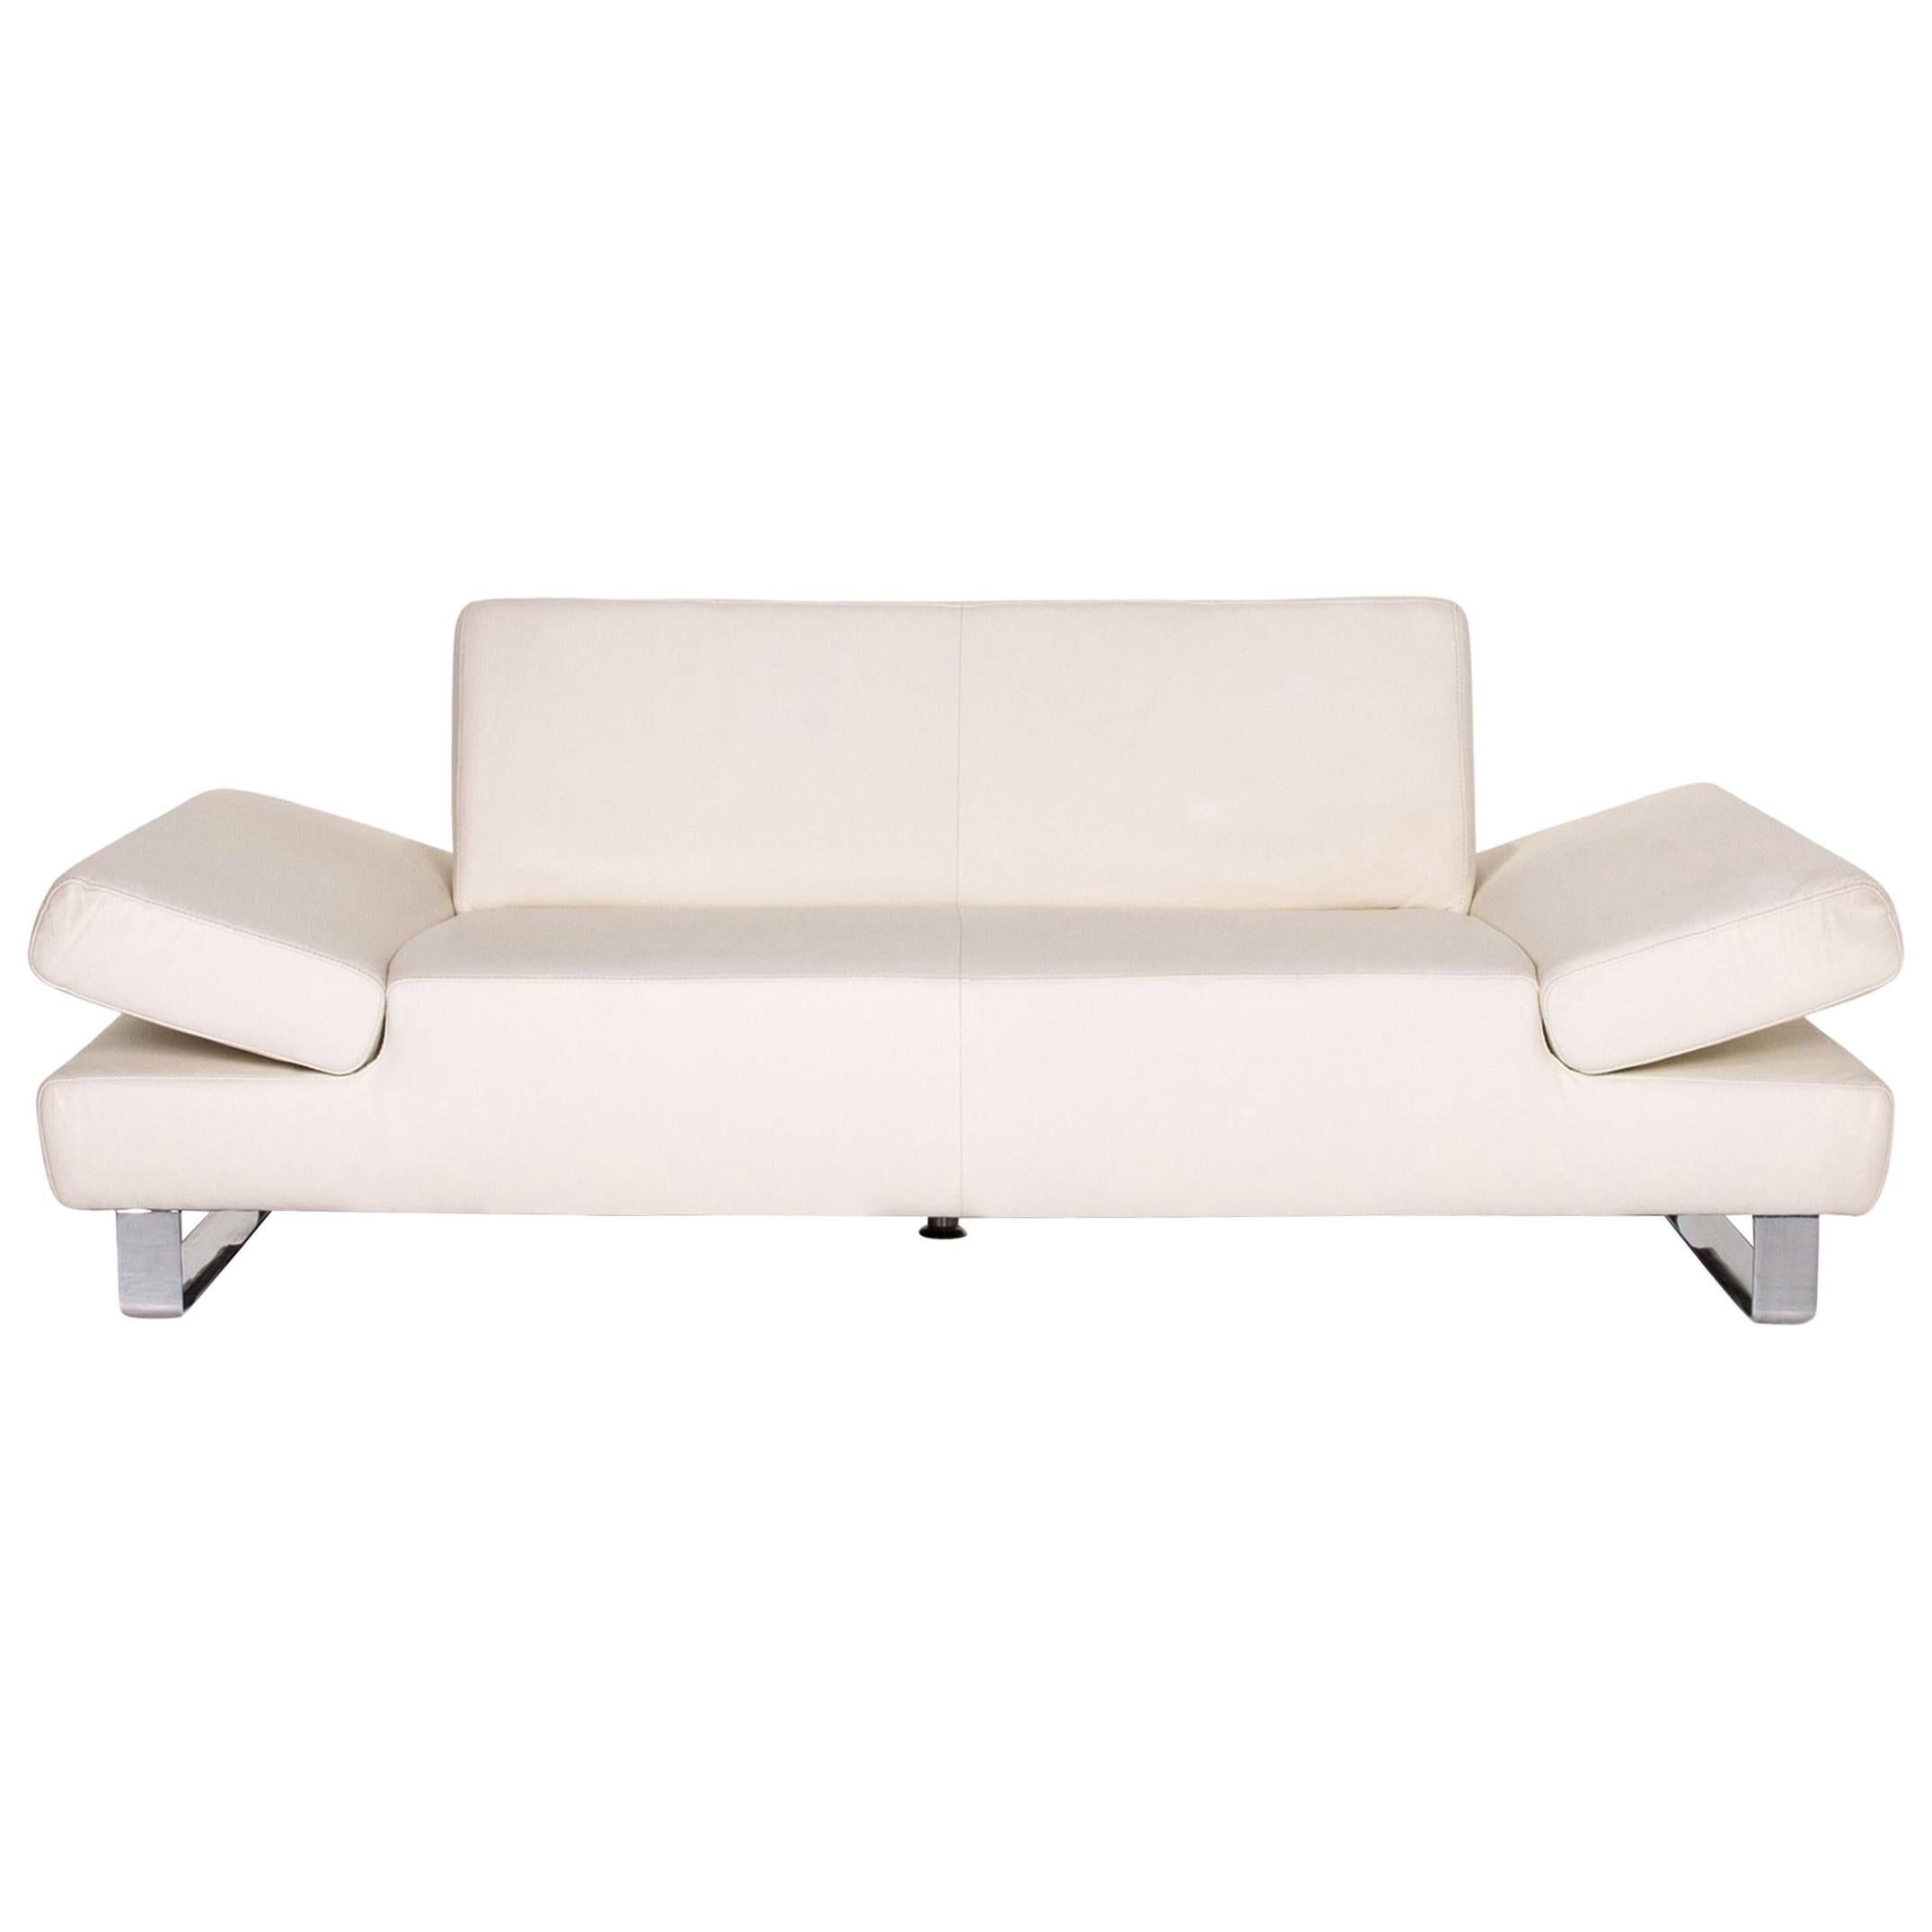 Willi Schillig Leather Sofa White Two-Seat Function Couch For Sale